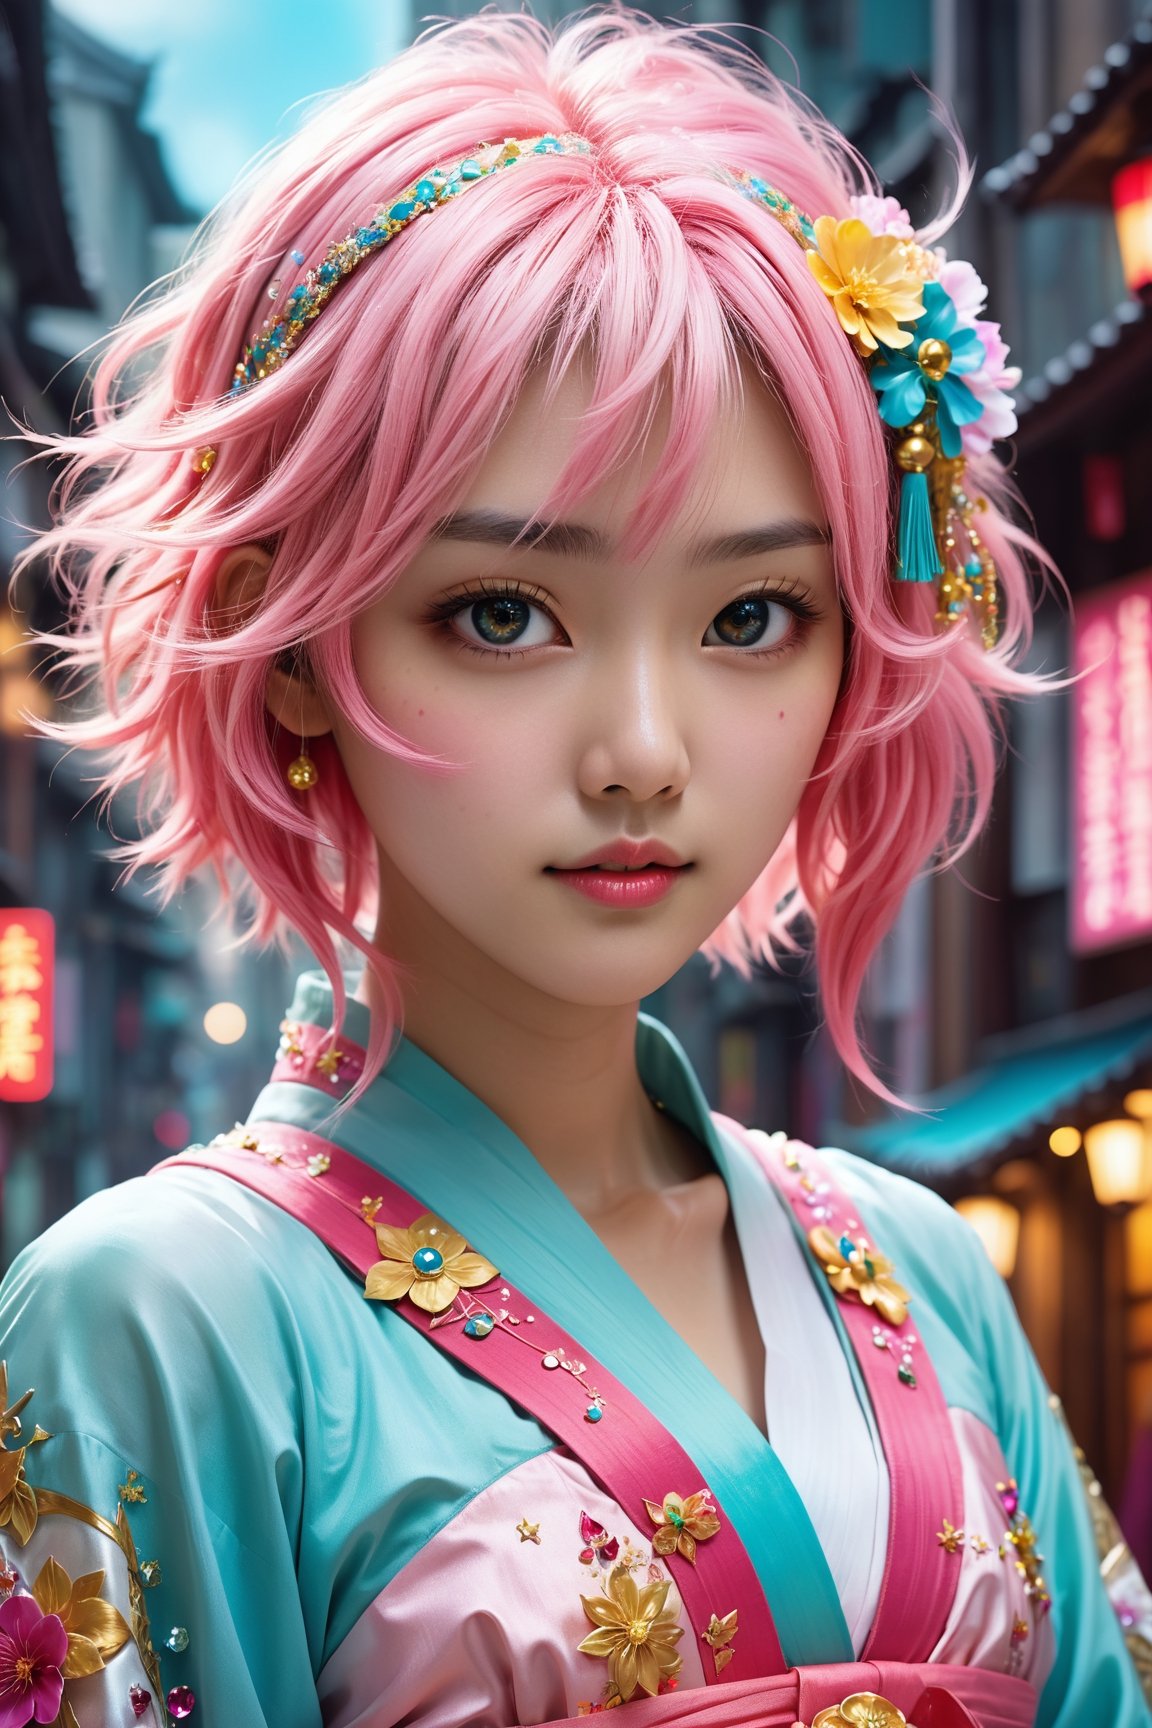  HONG KONG Girl ((September Ai)) , Pink AQUA Yellow  short messy hair, 

1girl wearing stunning white, red miko clothes with a adorned with pink jewels. The celestial environment is breathtaking, filled with dynamic lighting that adds a magical touch. herself has elegant and detailed facial features, mesmerizing pink eyes, and flowing brunette hair. The illustration is full of vibrant colors, hyper-detailed features, and a mystical atmosphere. It seamlessly blends fantasy and science fiction and will leave you in awe,miko ,bg_imgs,highres
